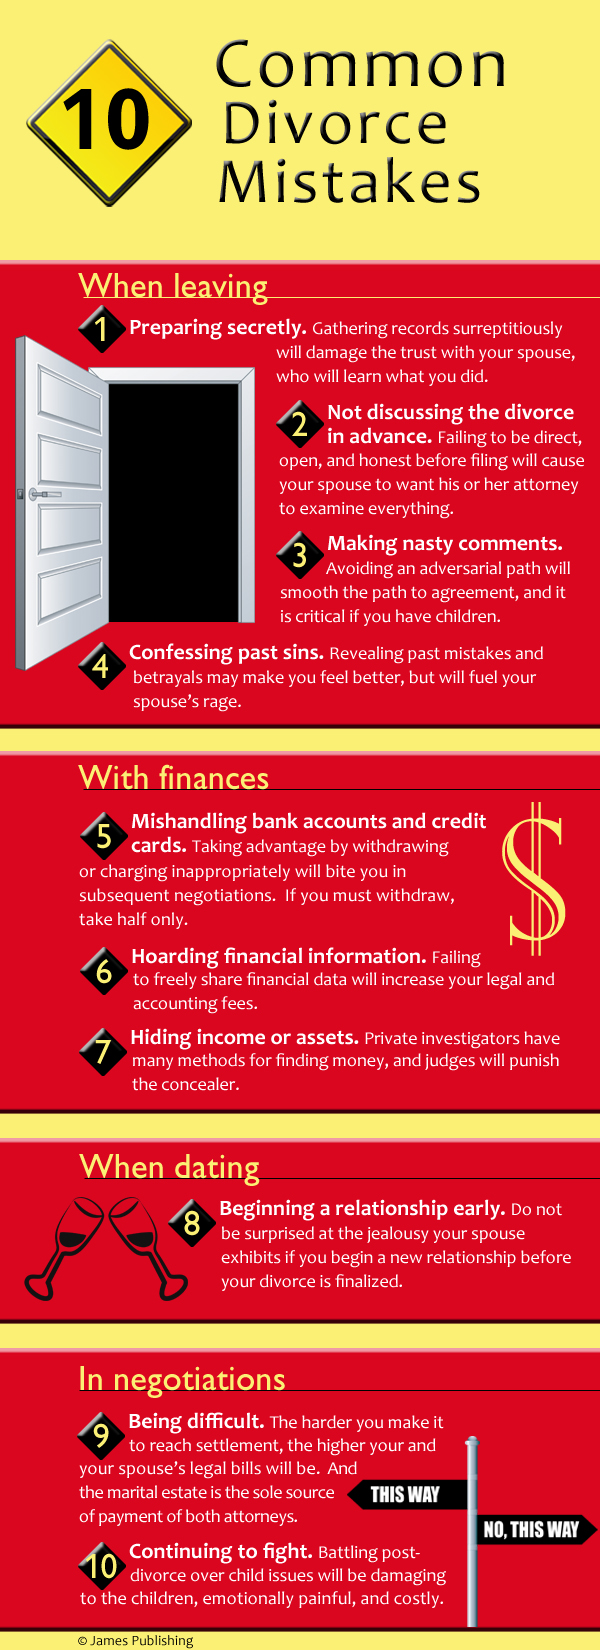 Austin Family Lawyers - Common Divorce Mistakes Infographic